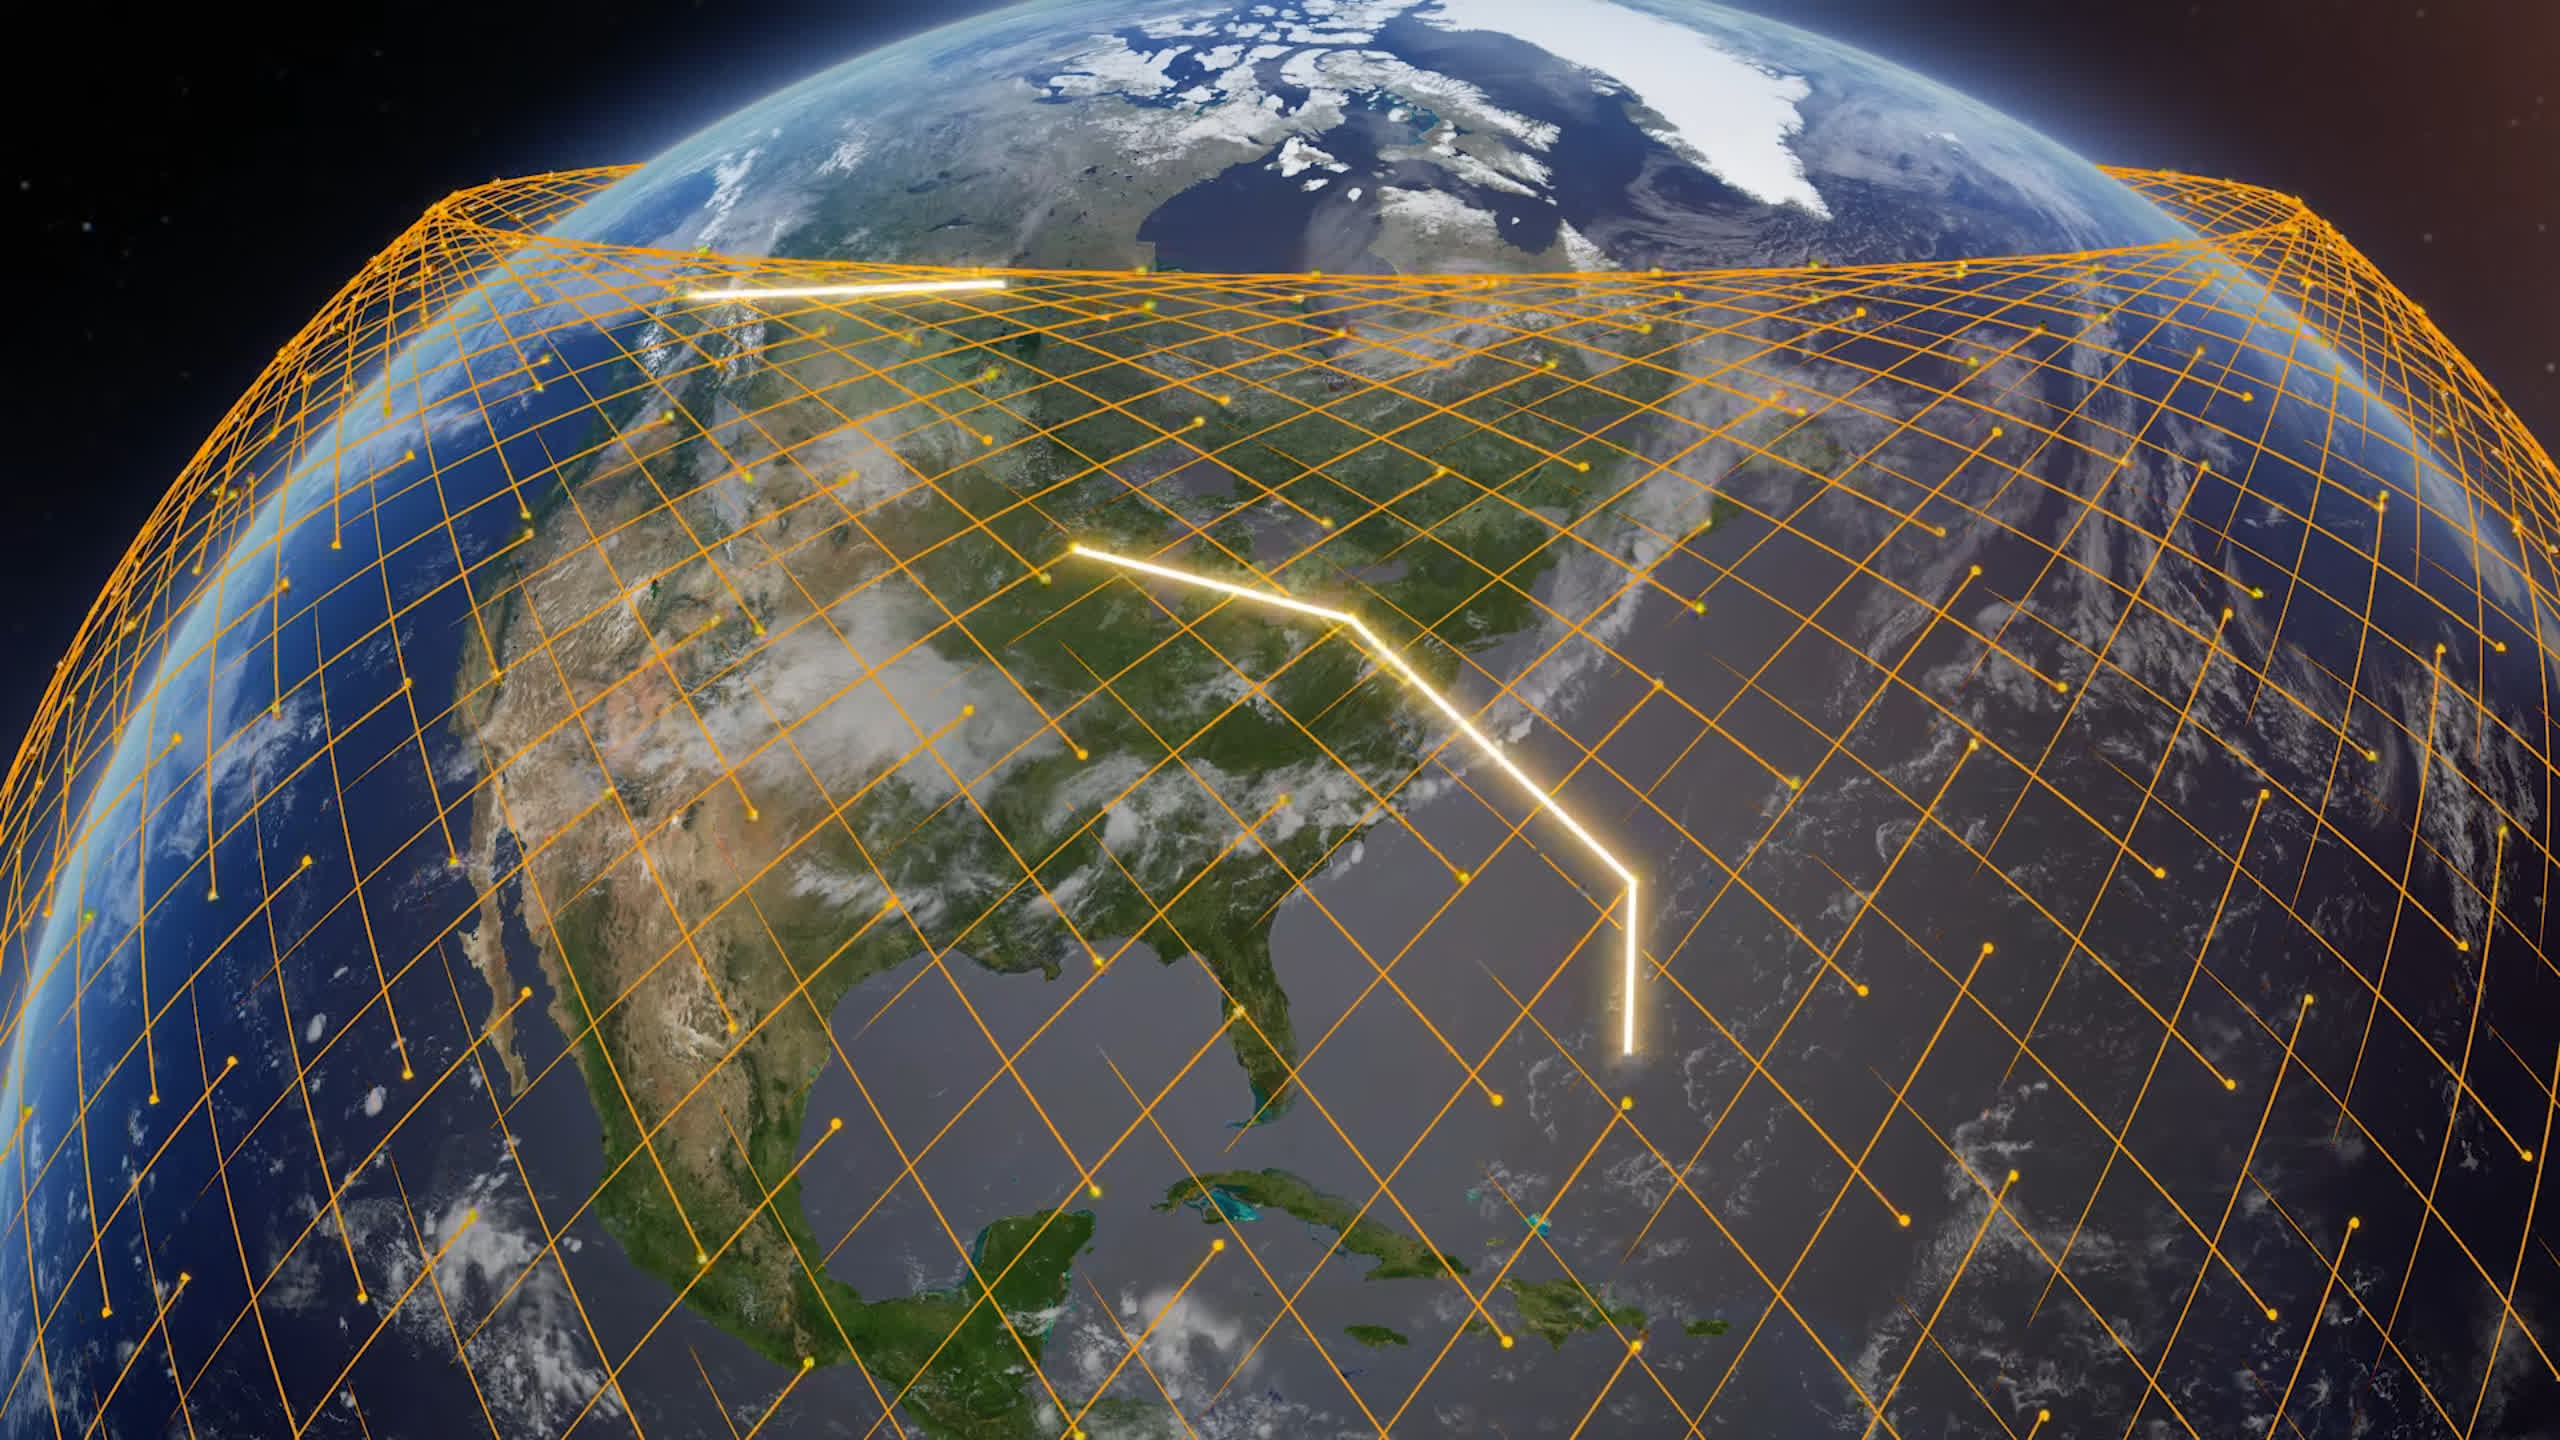 Amazon's internet satellites will communicate using lasers in space